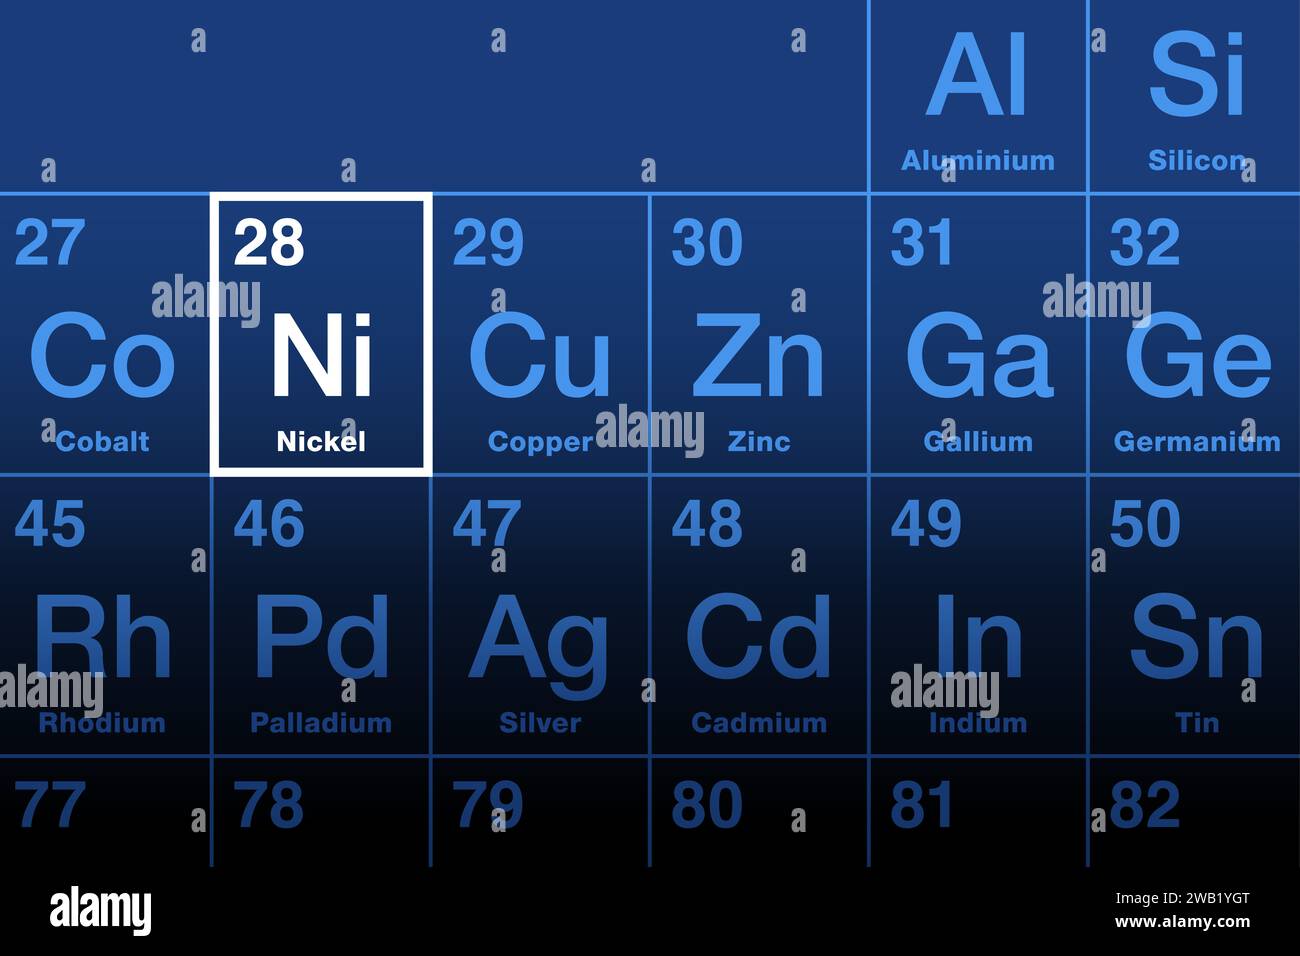 Nickel element on the periodic table. Ferromagnetic transition metal, with the element symbol Ni, and with the atomic number 28. Stock Photo